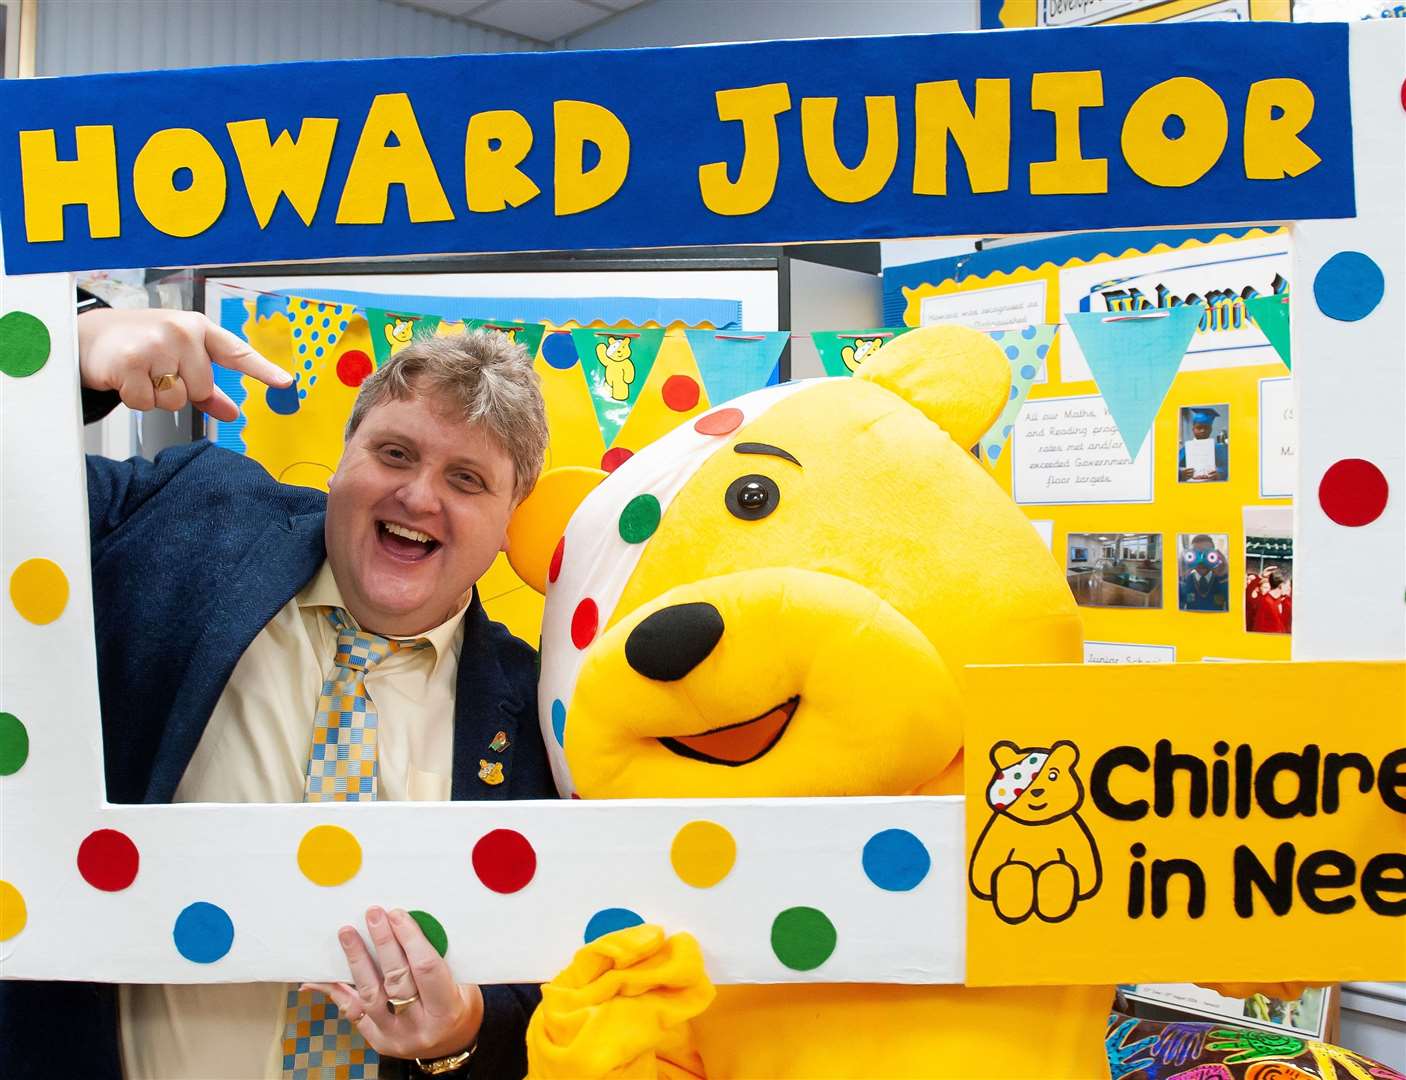 Mr Hill pictured at the school during a Children in Need event